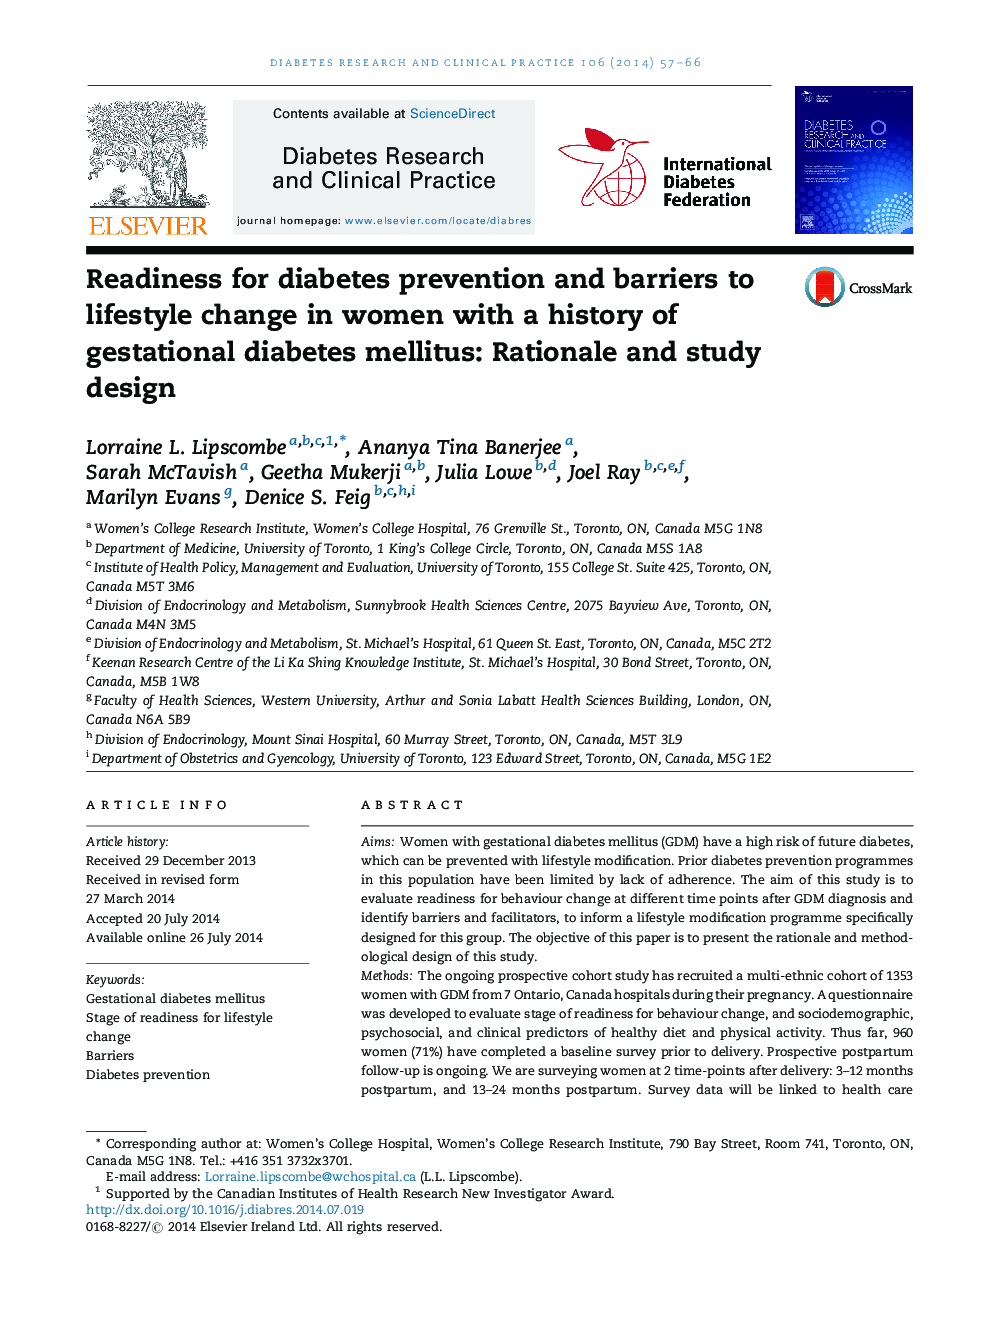 Readiness for diabetes prevention and barriers to lifestyle change in women with a history of gestational diabetes mellitus: Rationale and study design